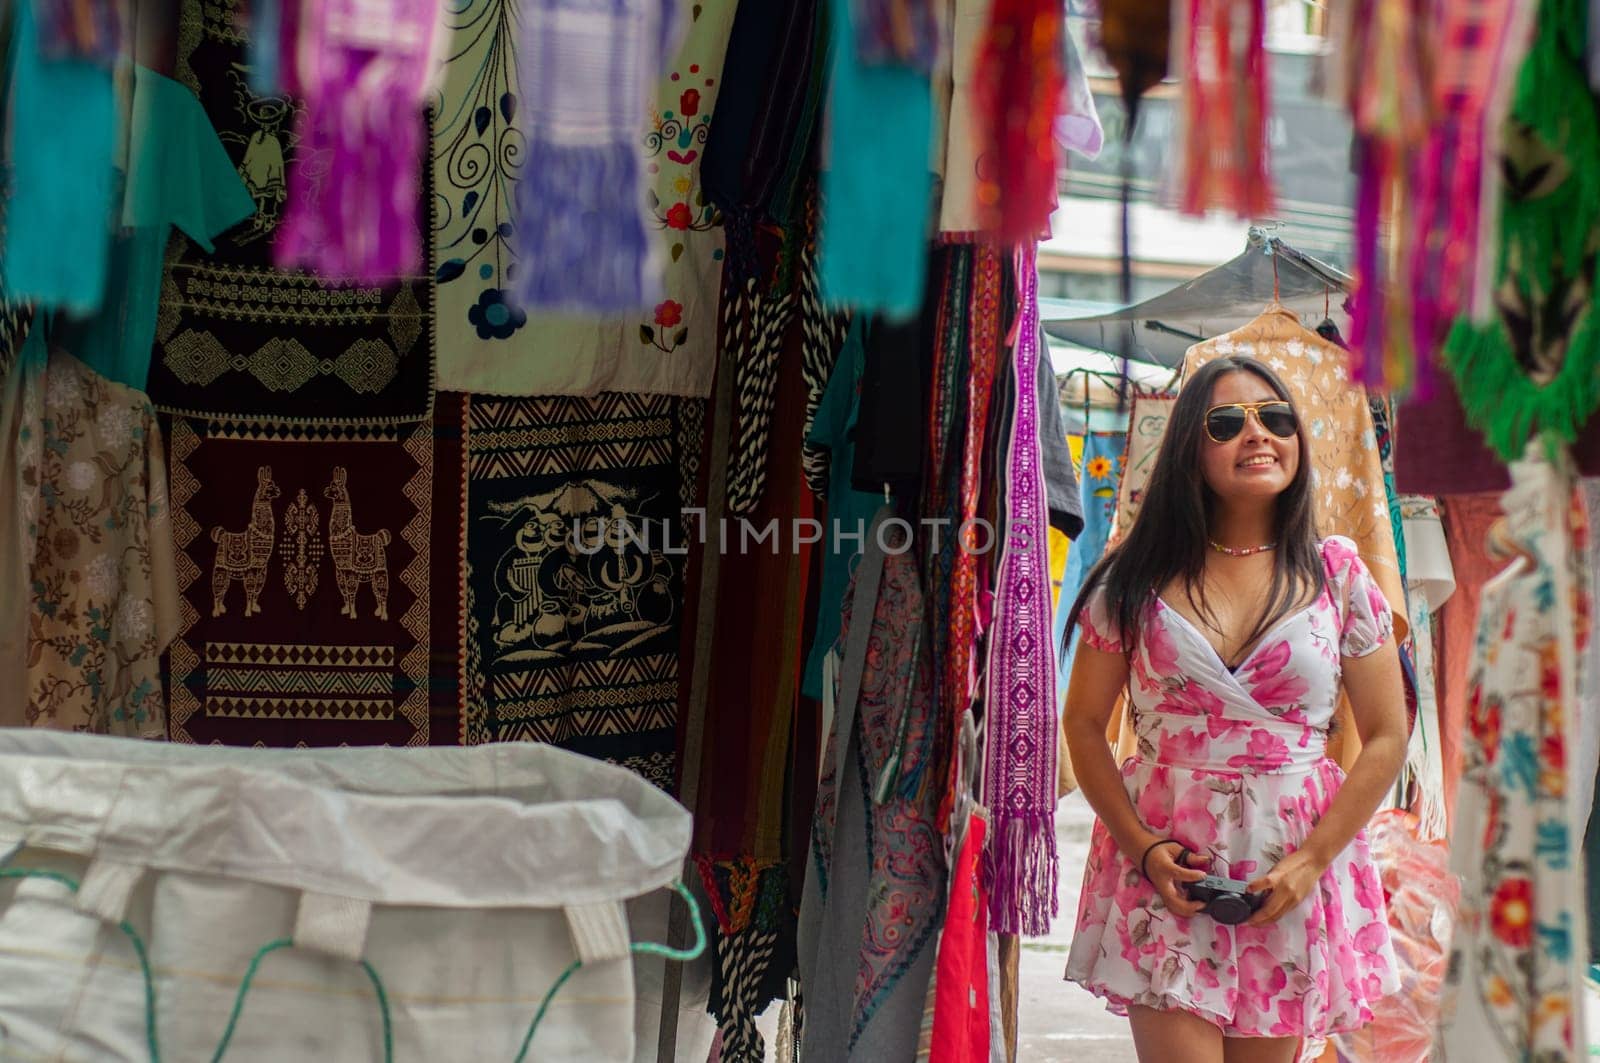 A cheerful woman browses through an array of vibrant textiles hanging at an outdoor marketplace, her sunglasses reflecting the bright daylight. by Raulmartin